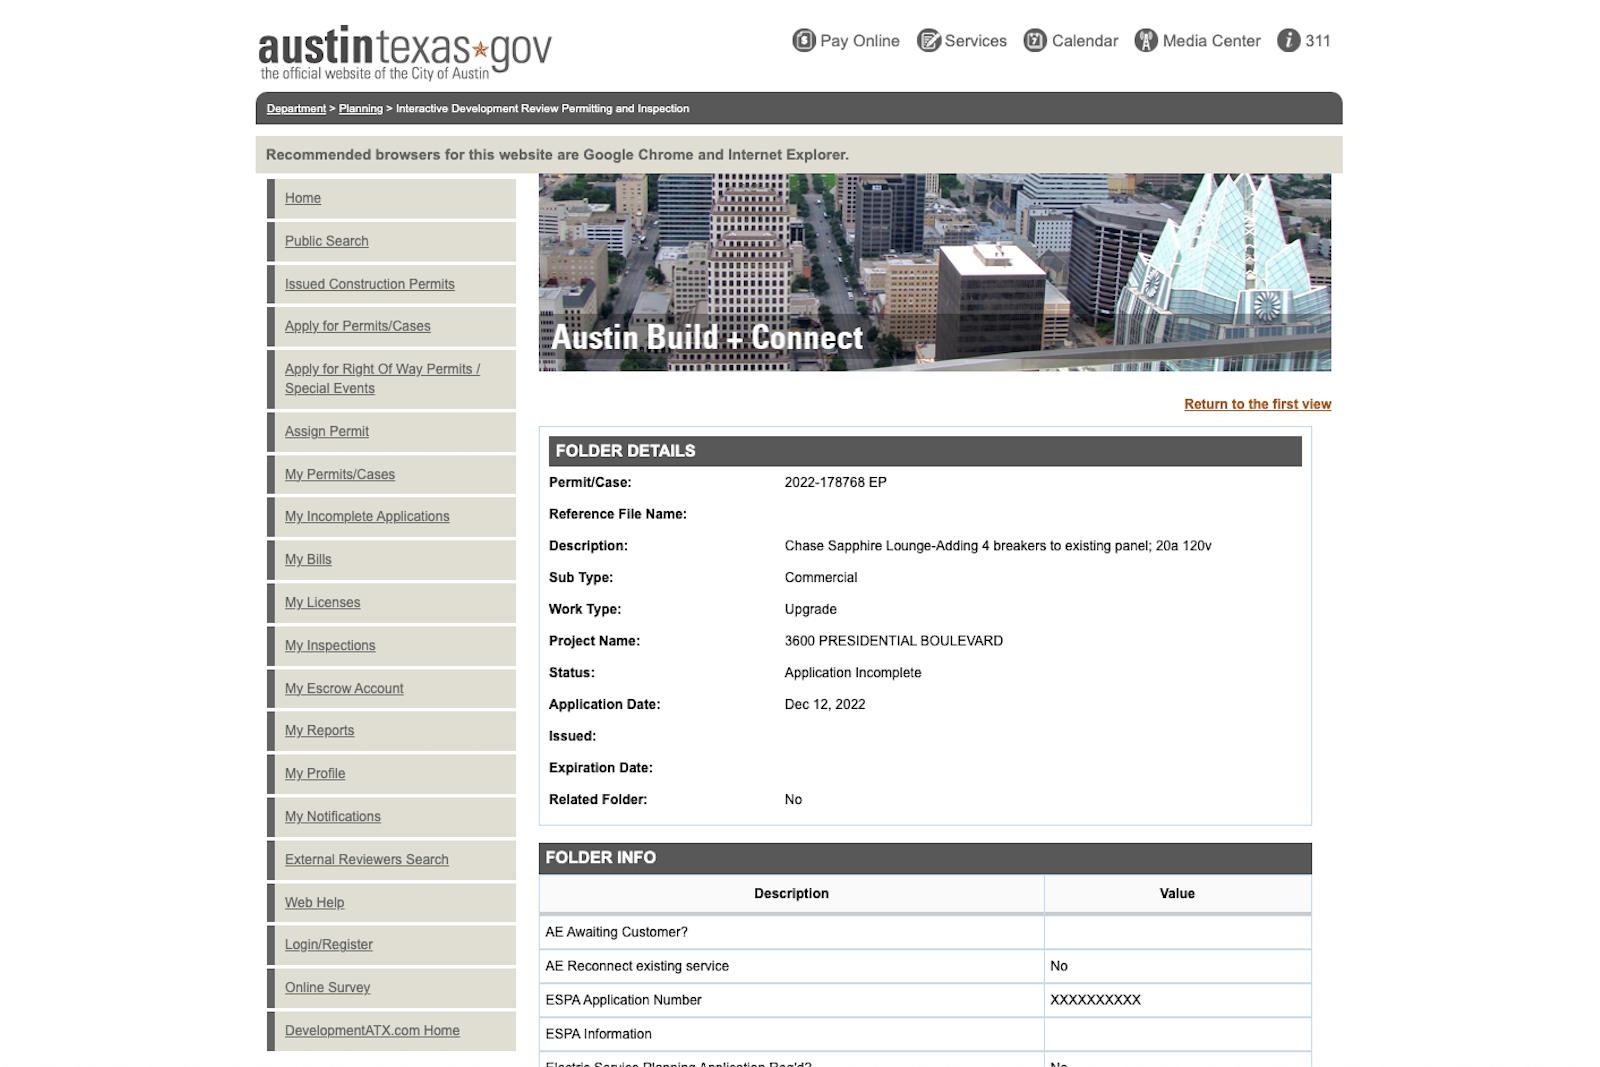 permit application number and source for an airport lounge permit in Austin, Texas